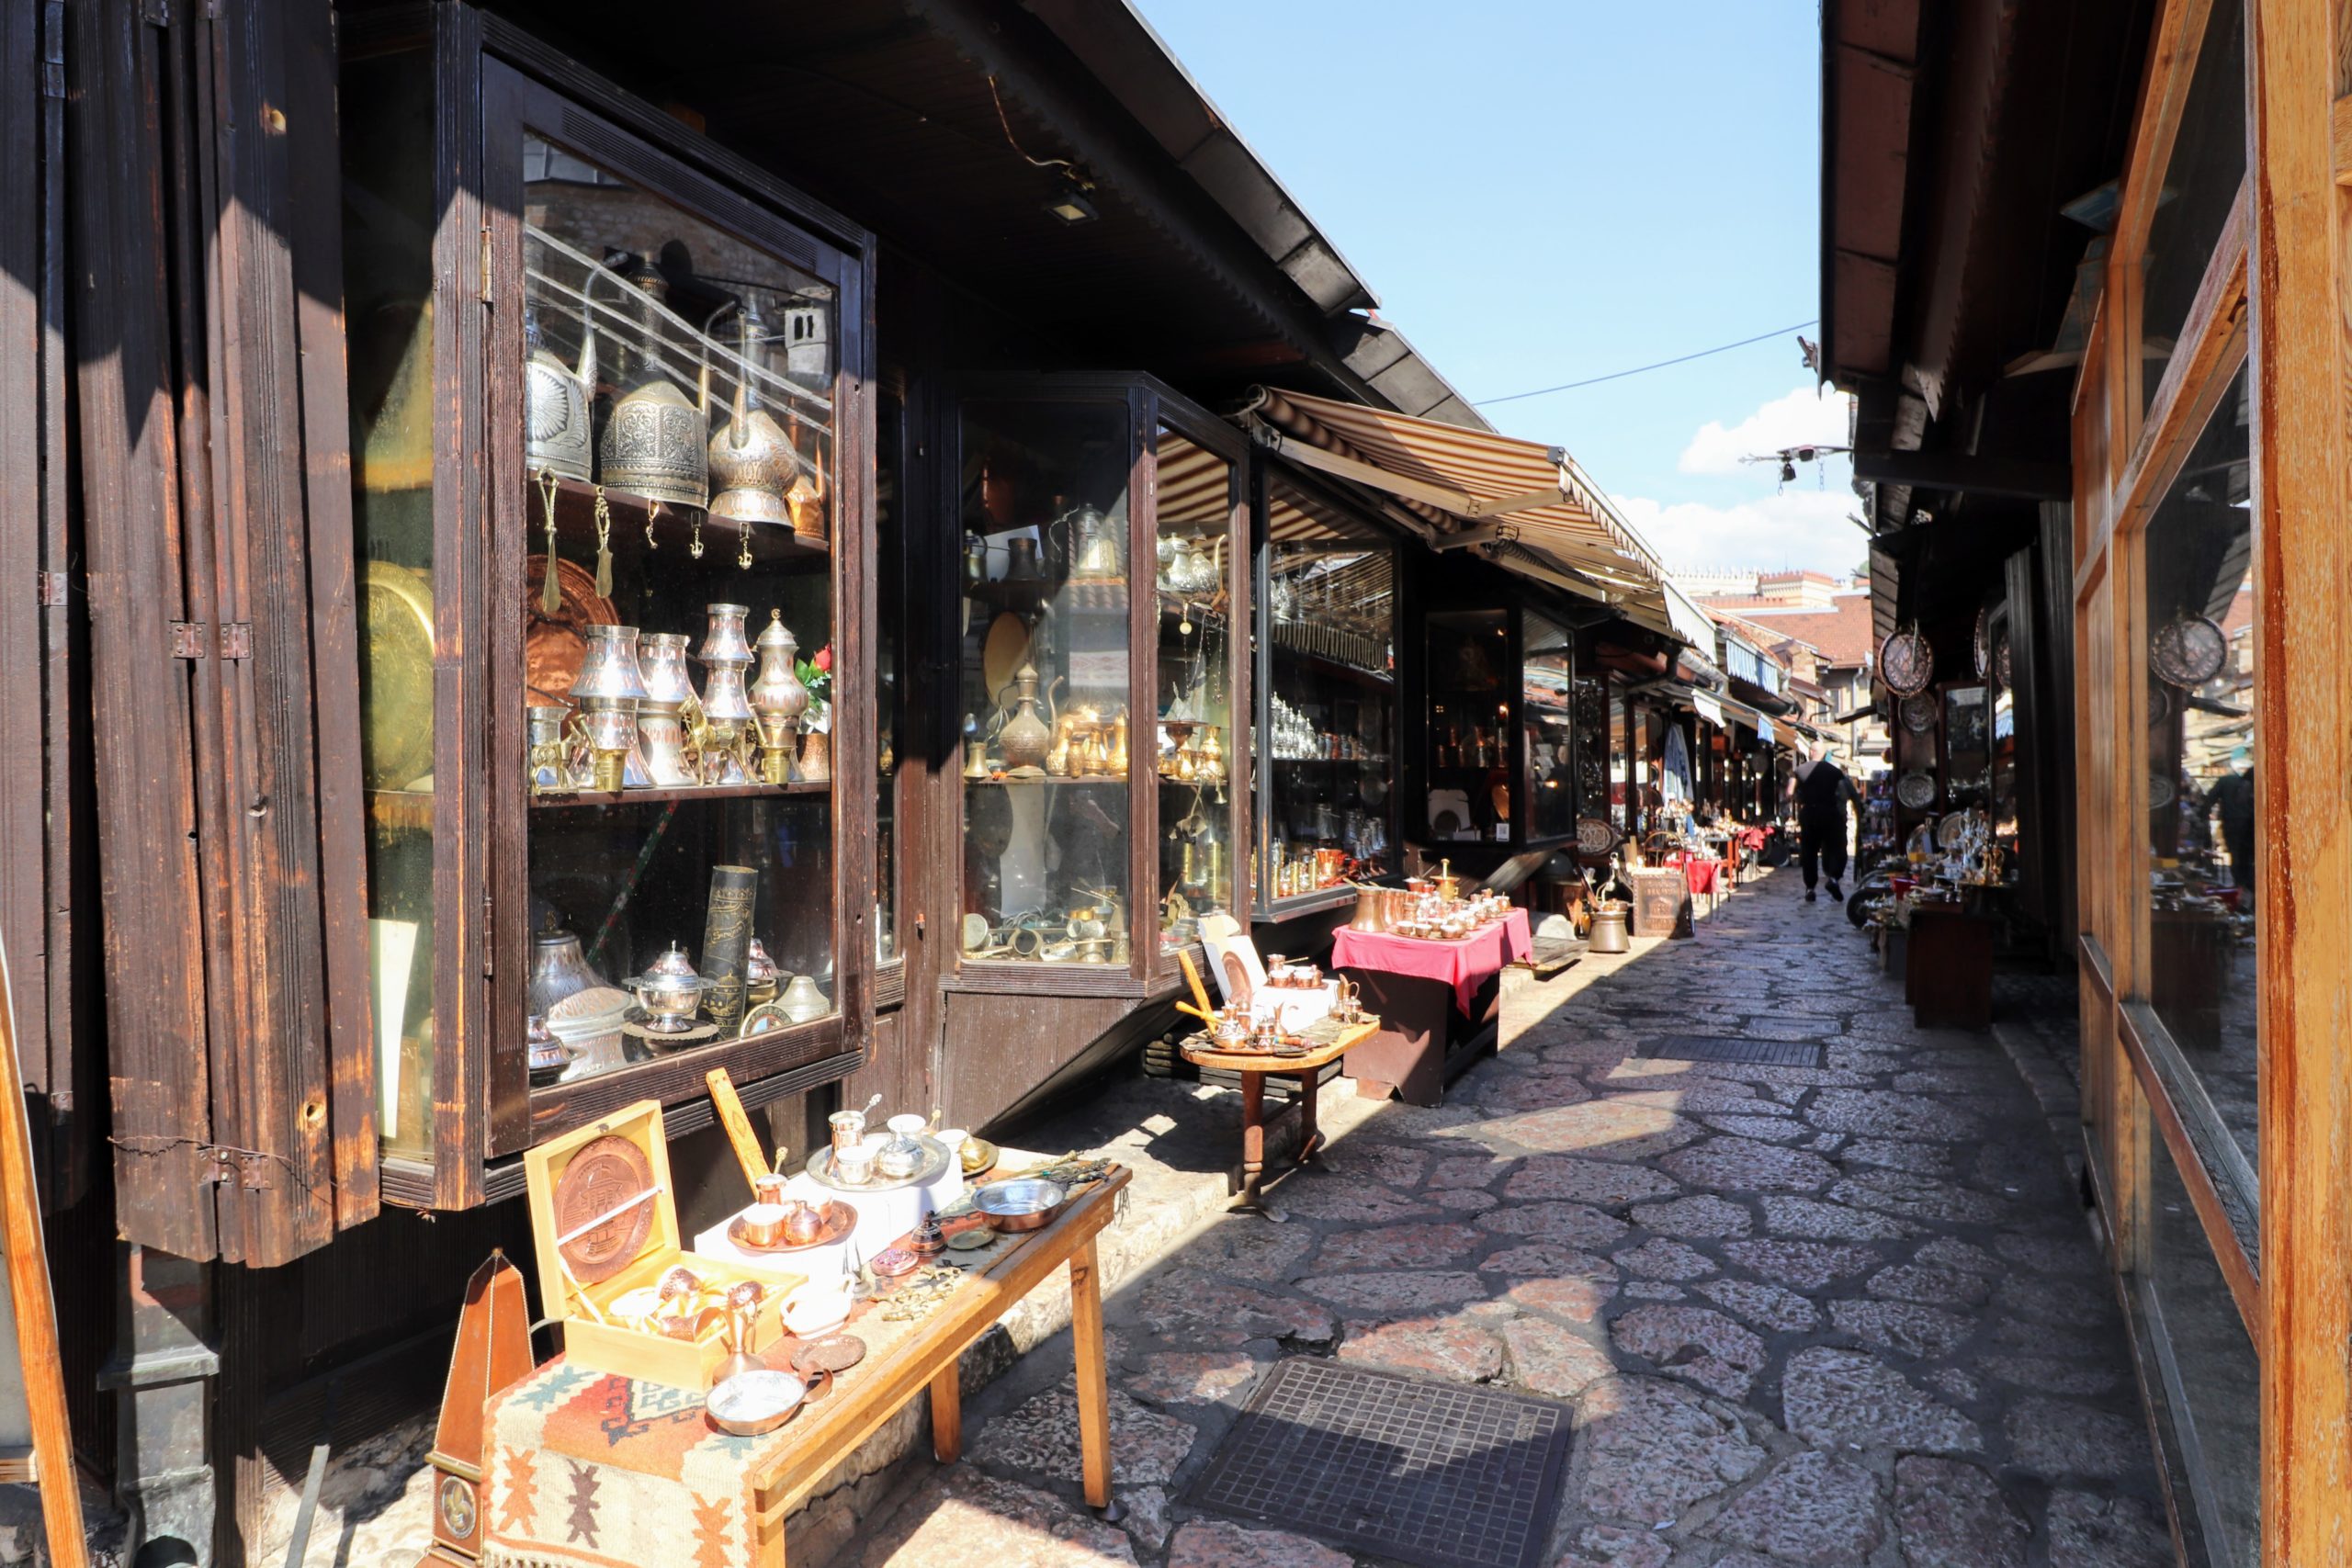 alley lined with shops selling copper handicrafts